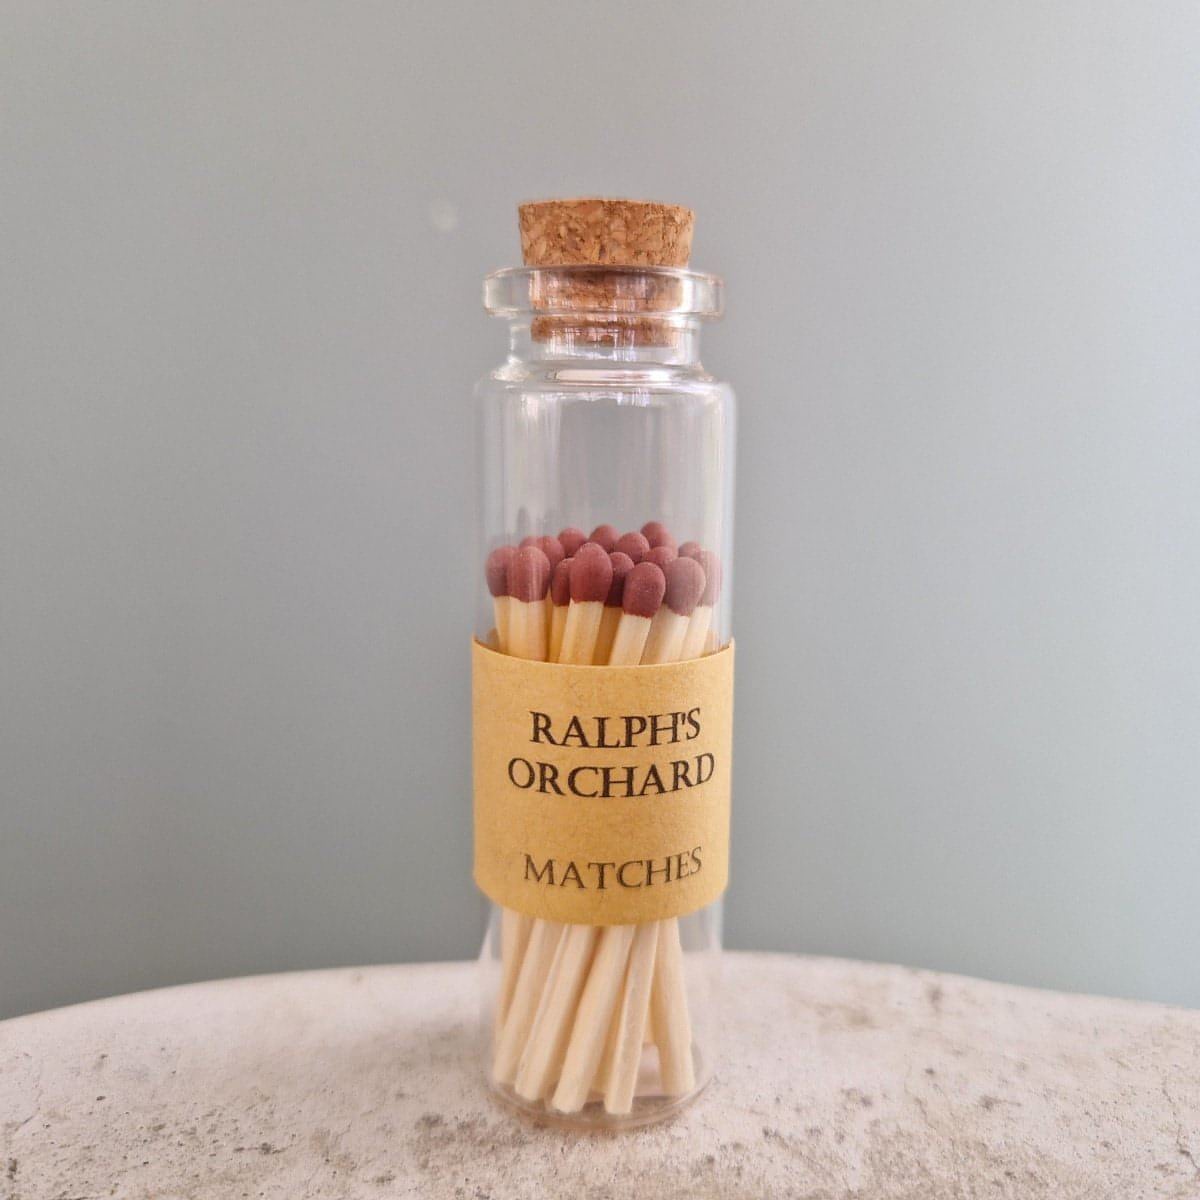 Matches in corked glass jar